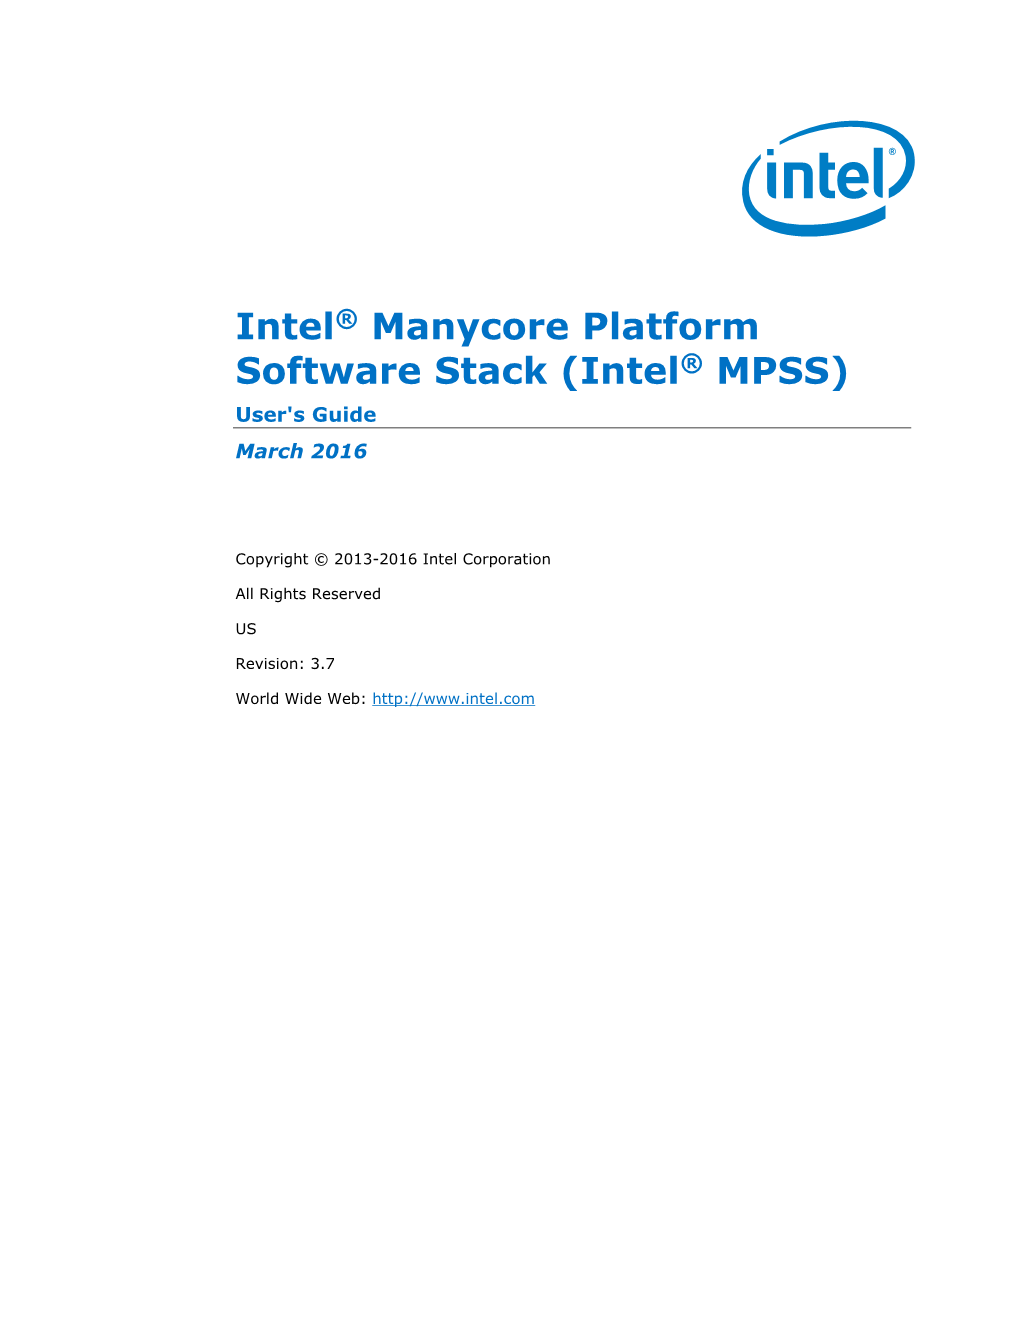 Intel® Manycore Platform Software Stack (Intel® MPSS) User's Guide March 2016